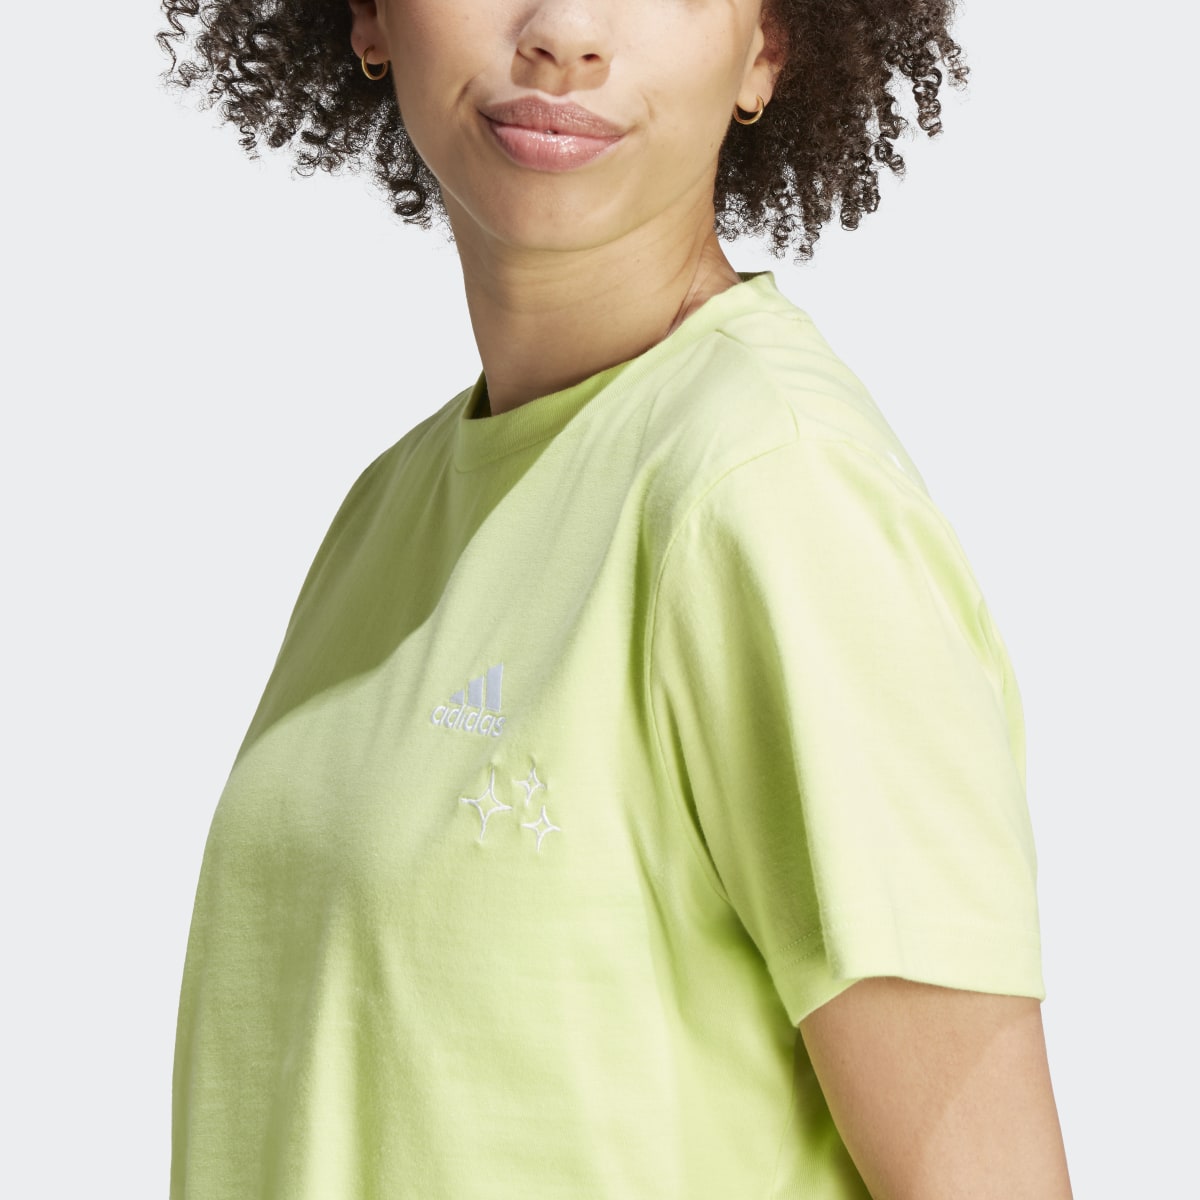 Adidas Scribble Embroidery Crop T-Shirt. 7